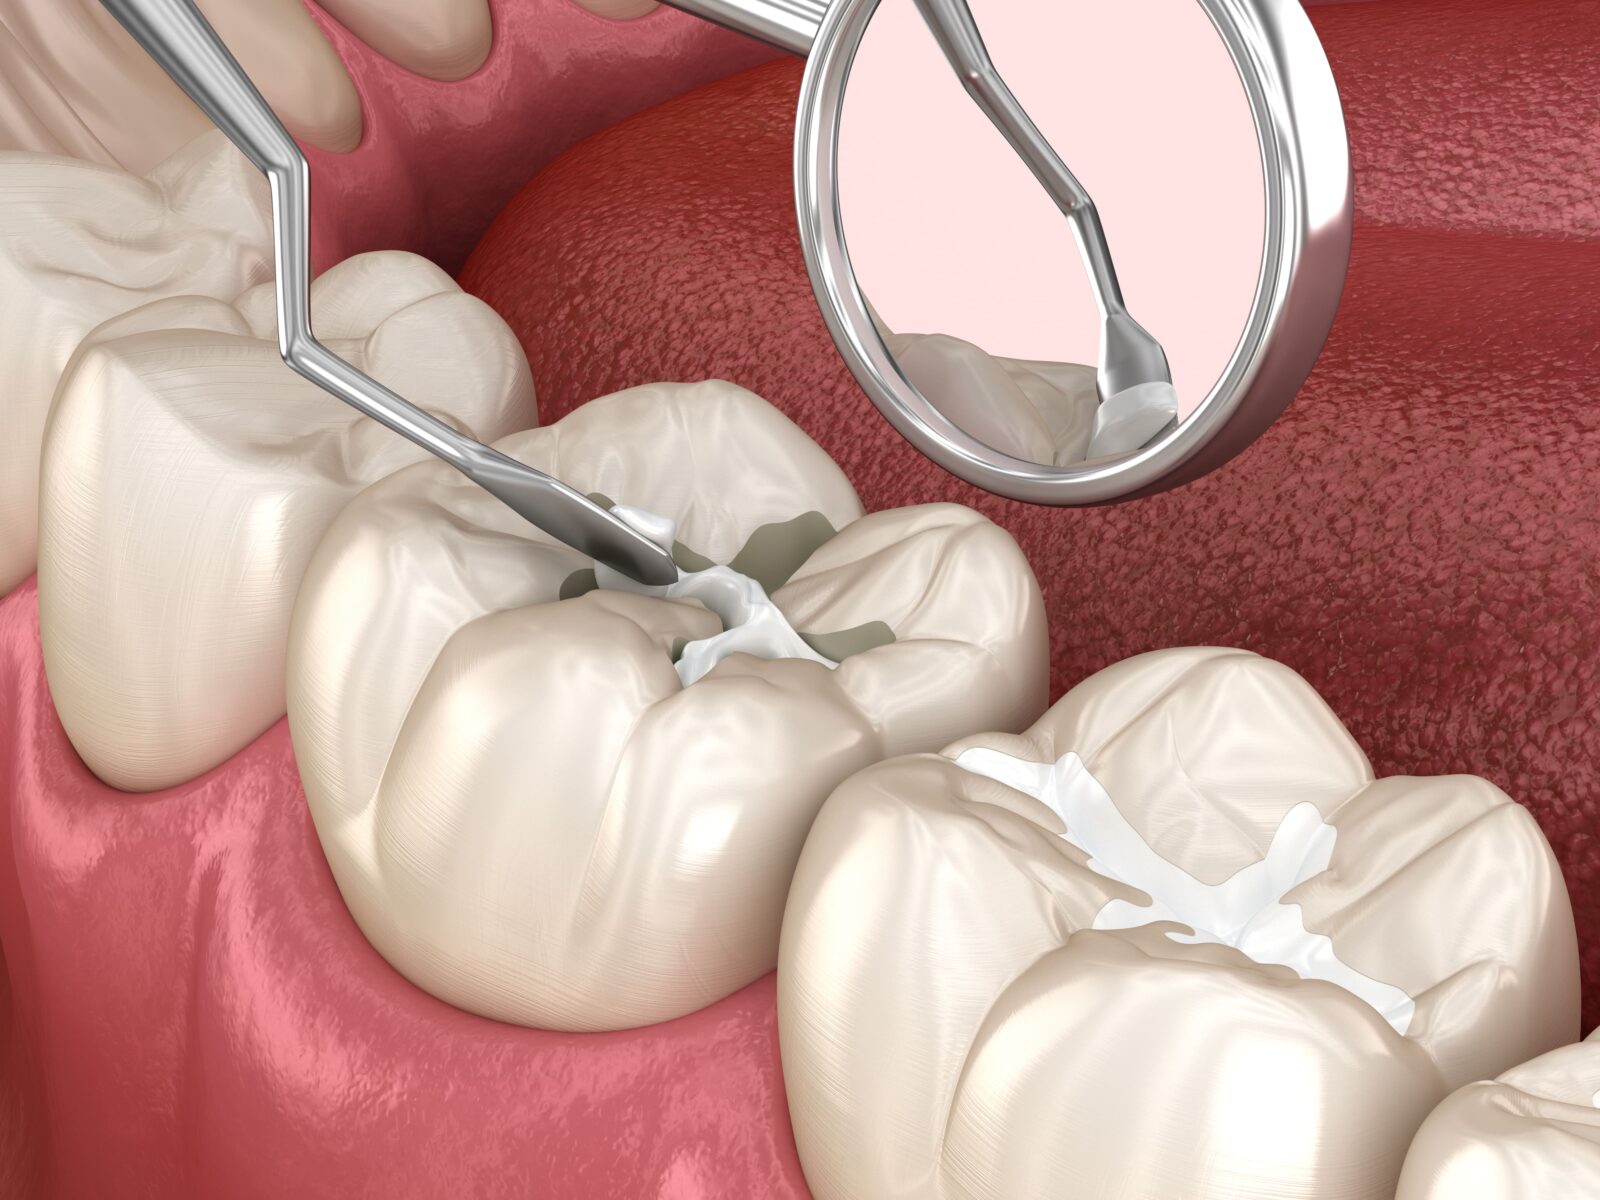 composite filling being placed in tooth